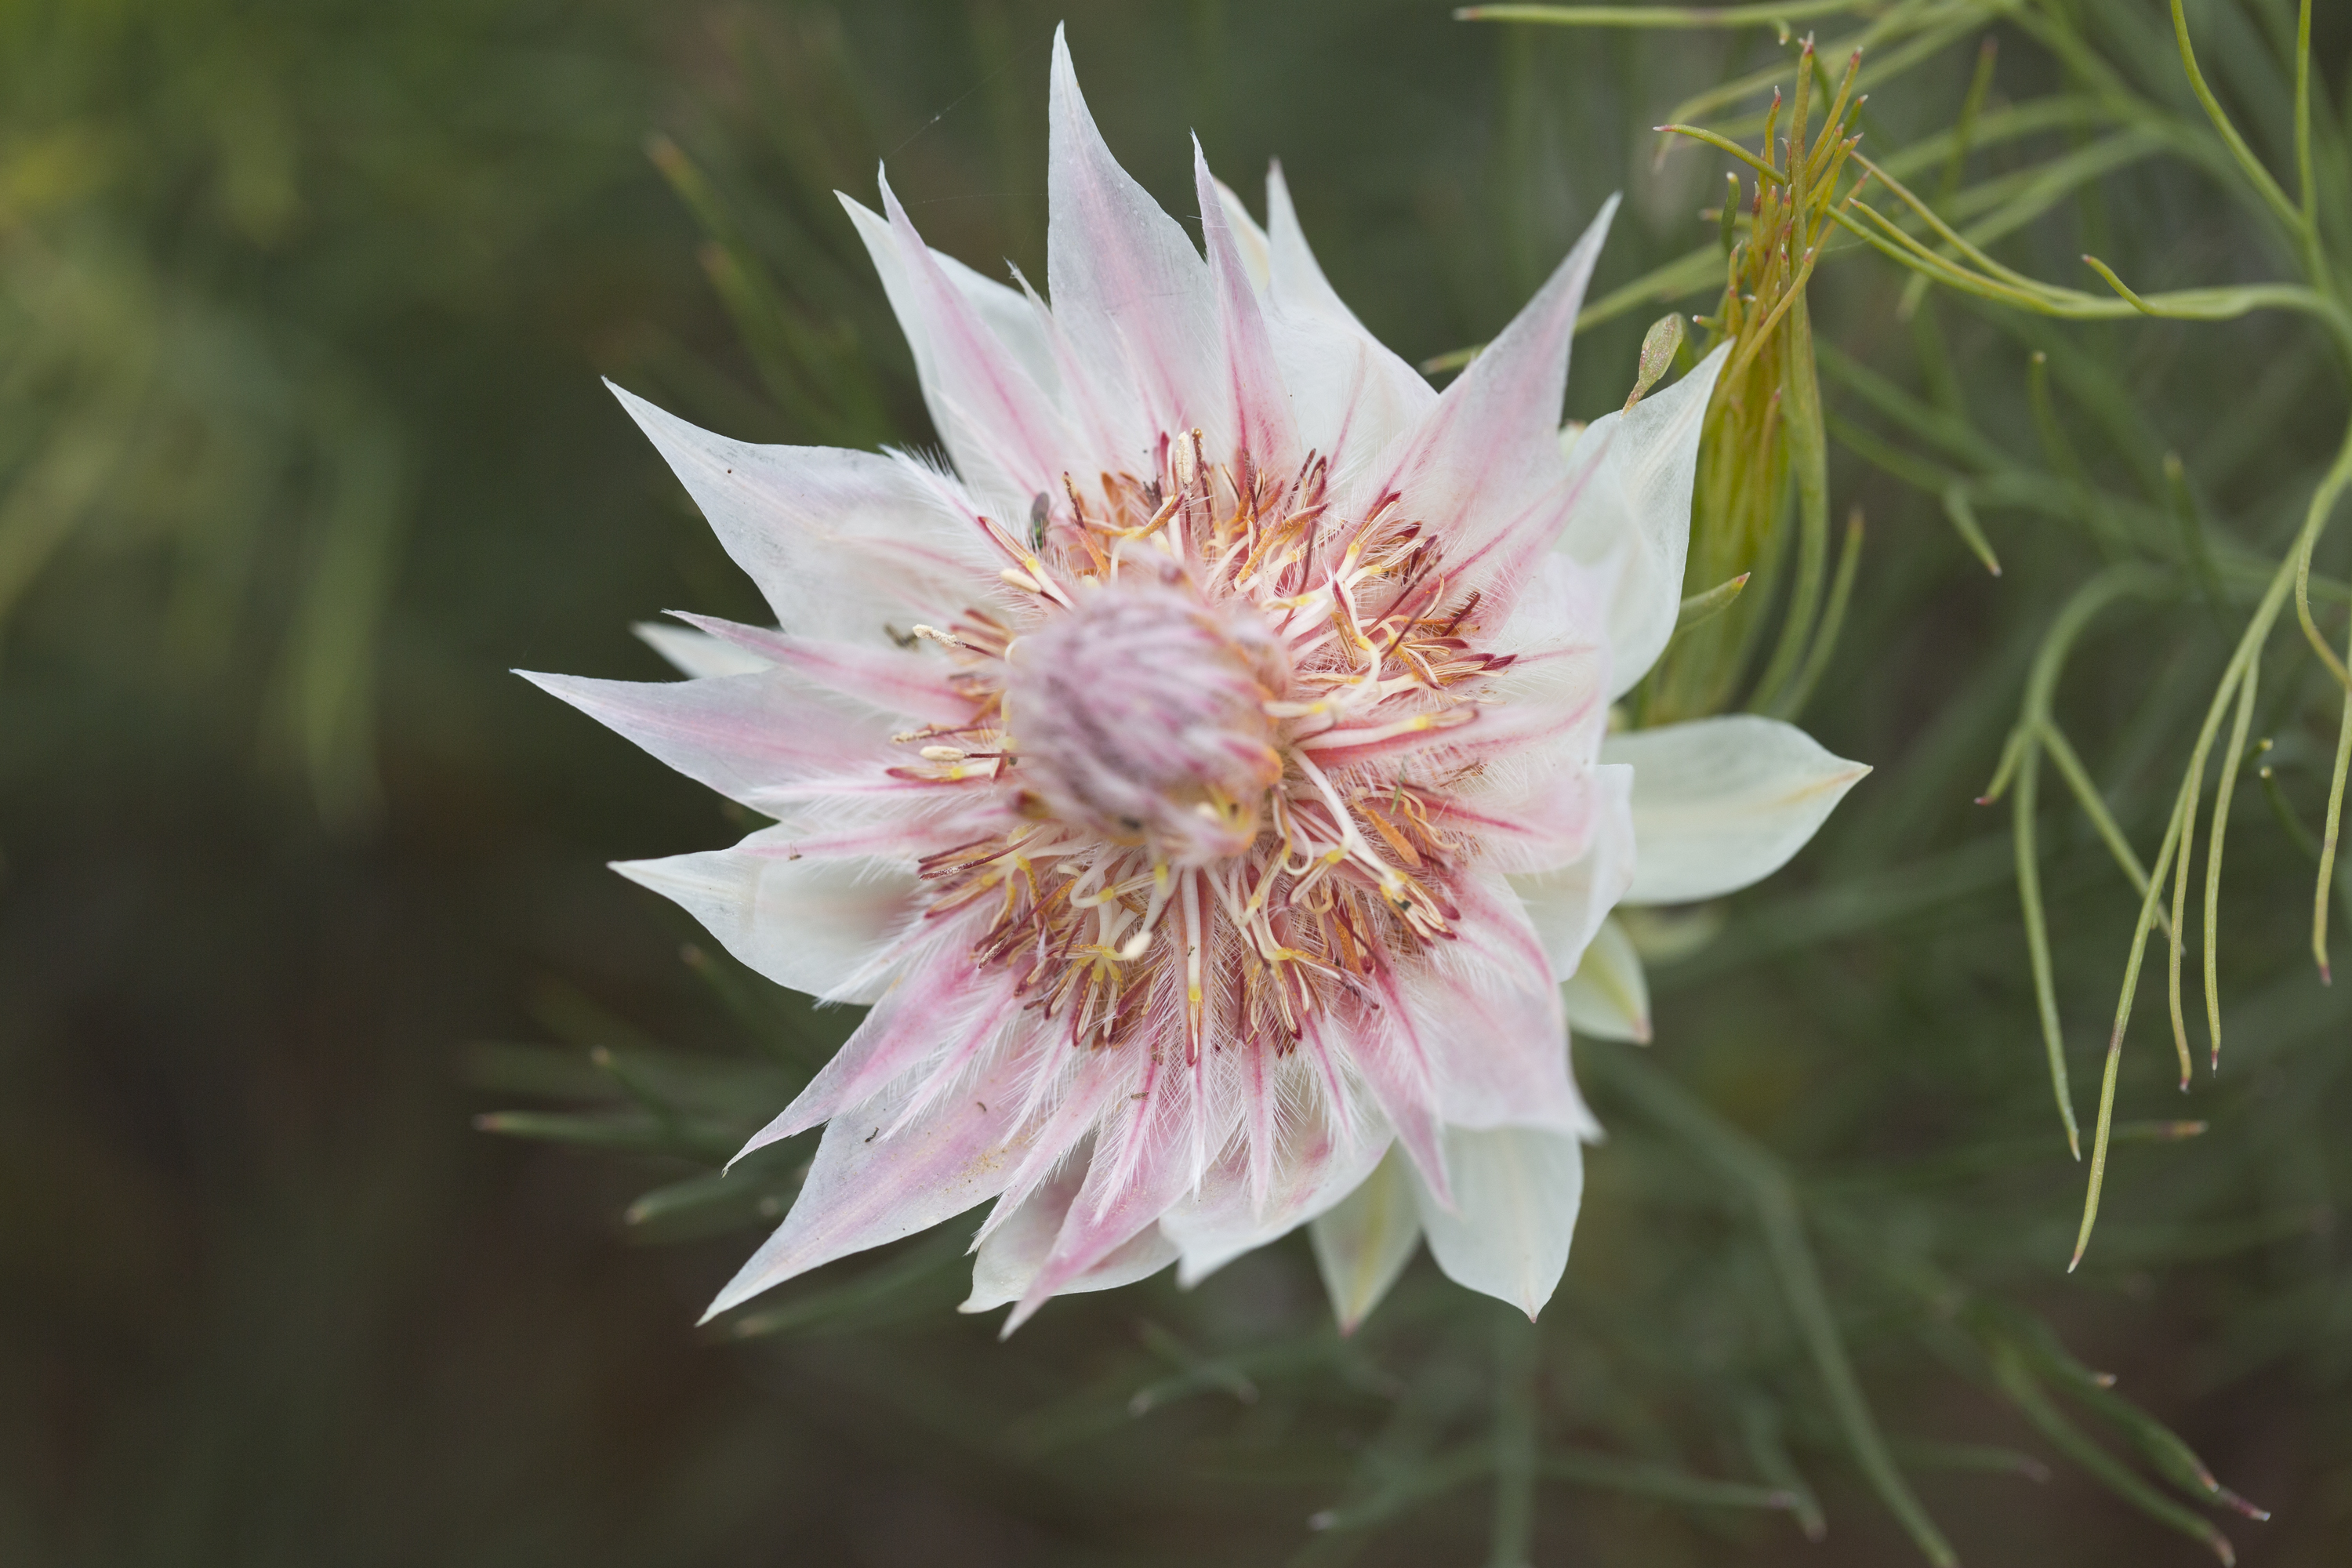 Import Flowers - This white blushing bride protea is definitely a stunner!